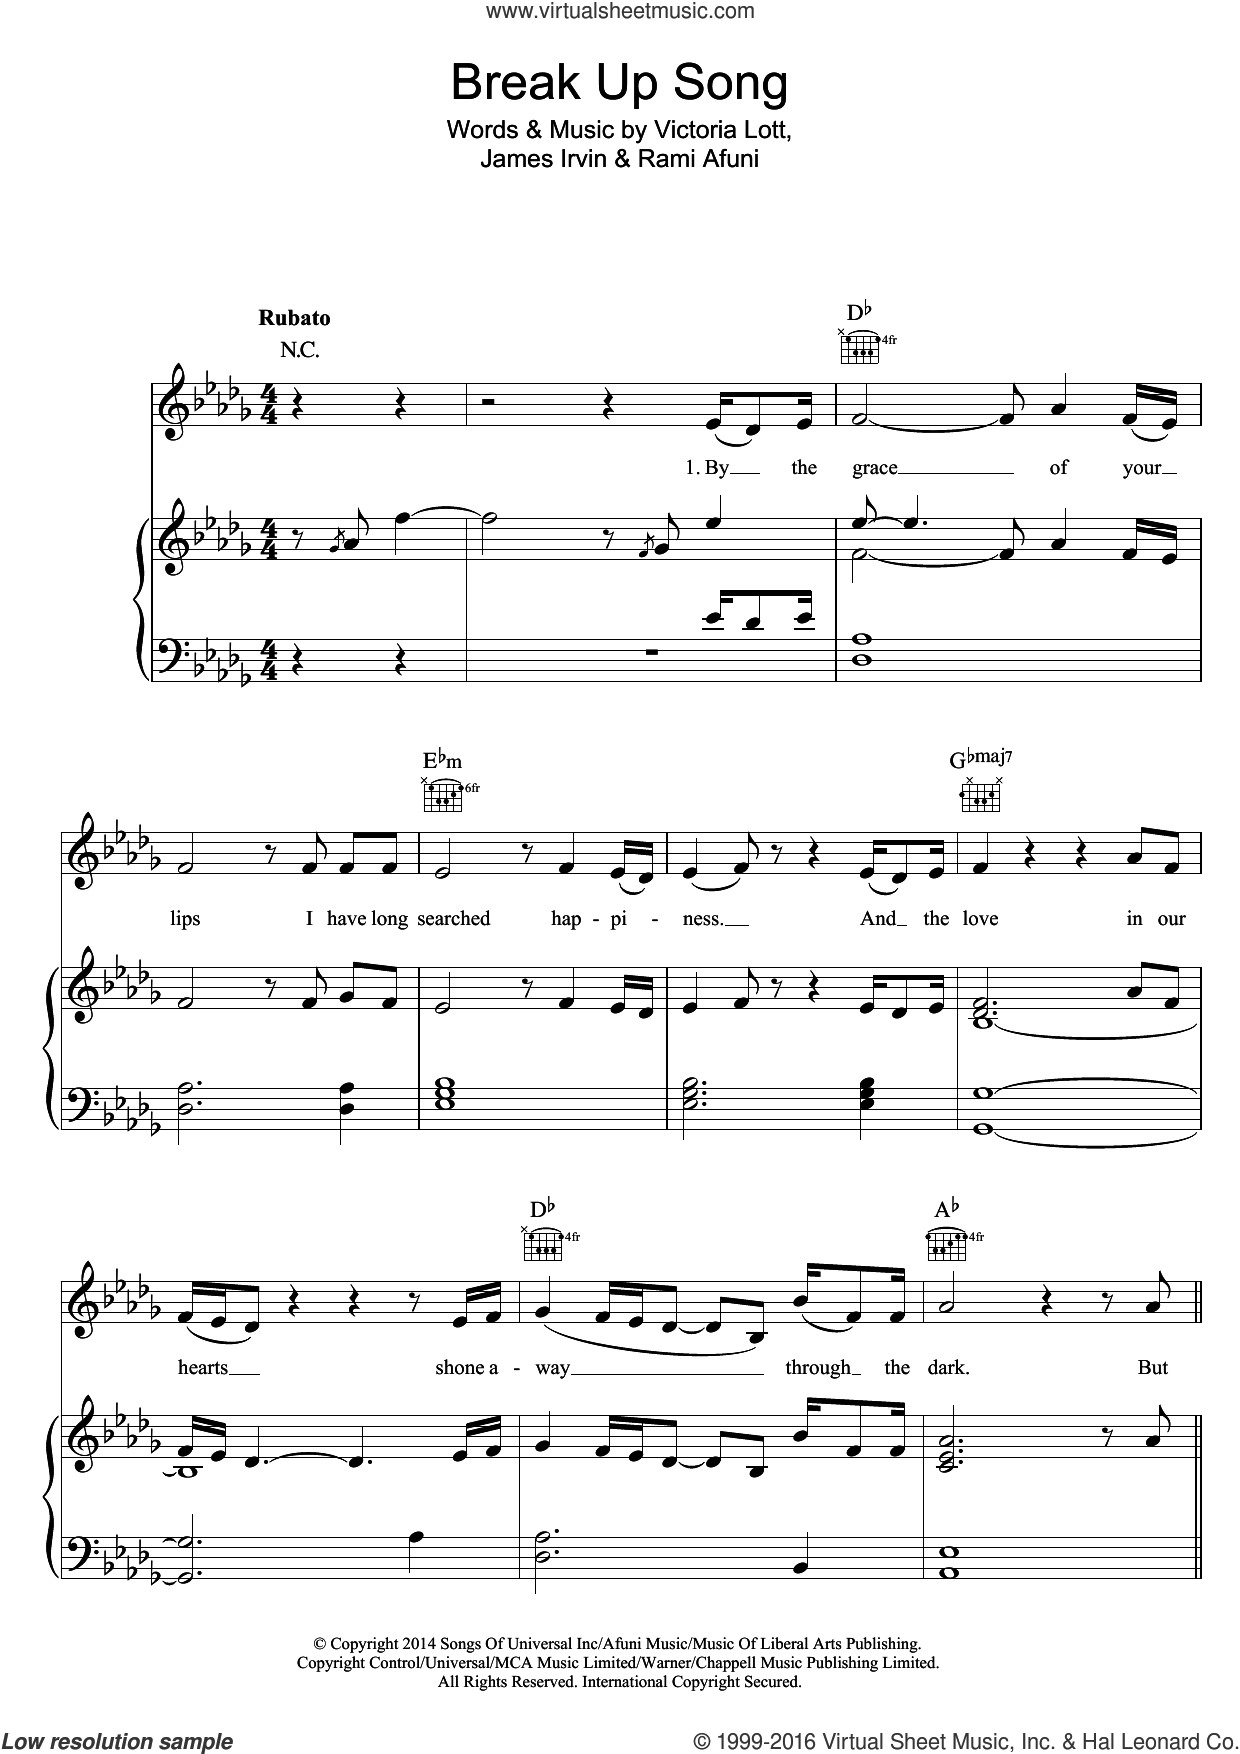 Break Up Song sheet music for voice, piano or guitar (PDF)